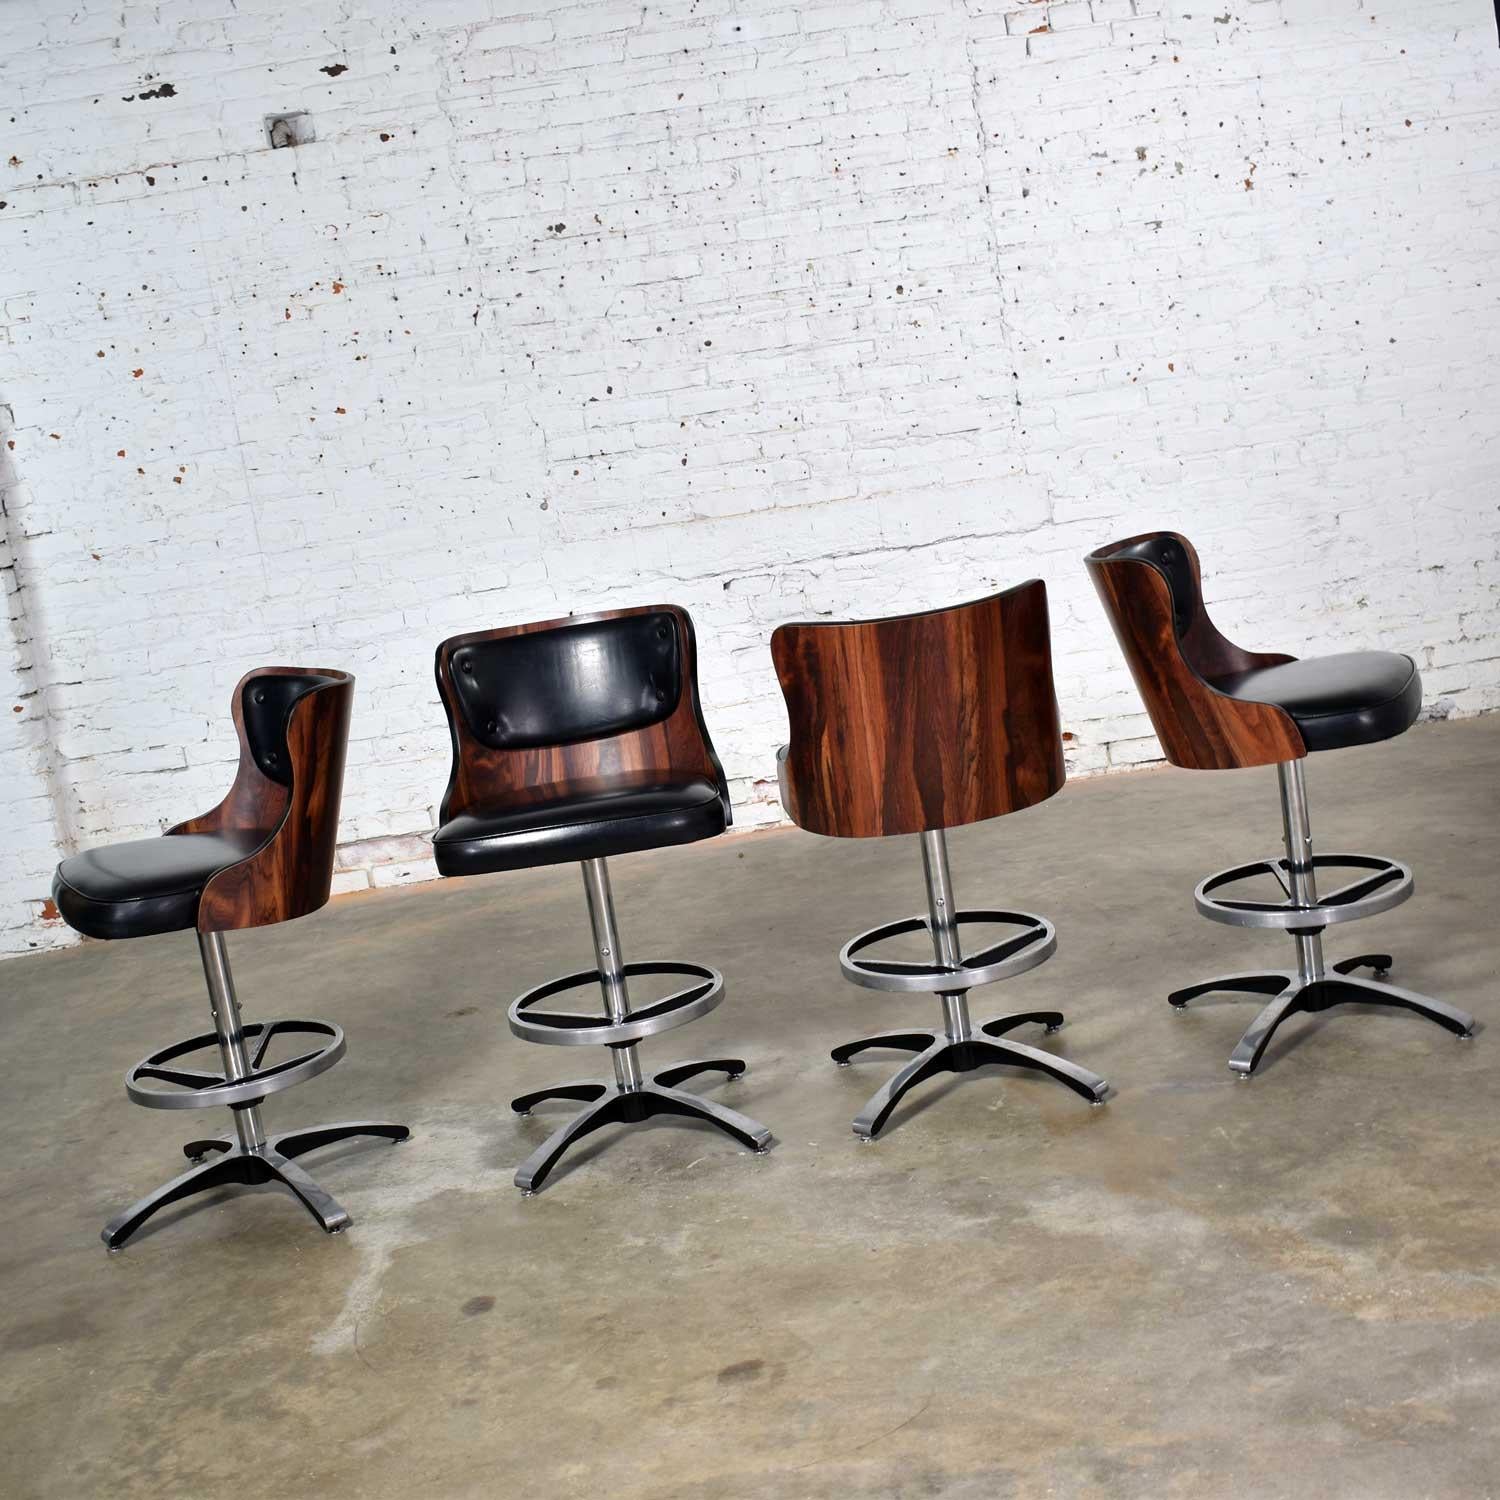 Handsome set of 4 vintage modern adjustable bar stools in laminate and black vinyl with chrome and cast aluminum bases by Daystrom. These stools adjust from bar height to counter height and swivel 360 degrees. They are in overall wonderful vintage